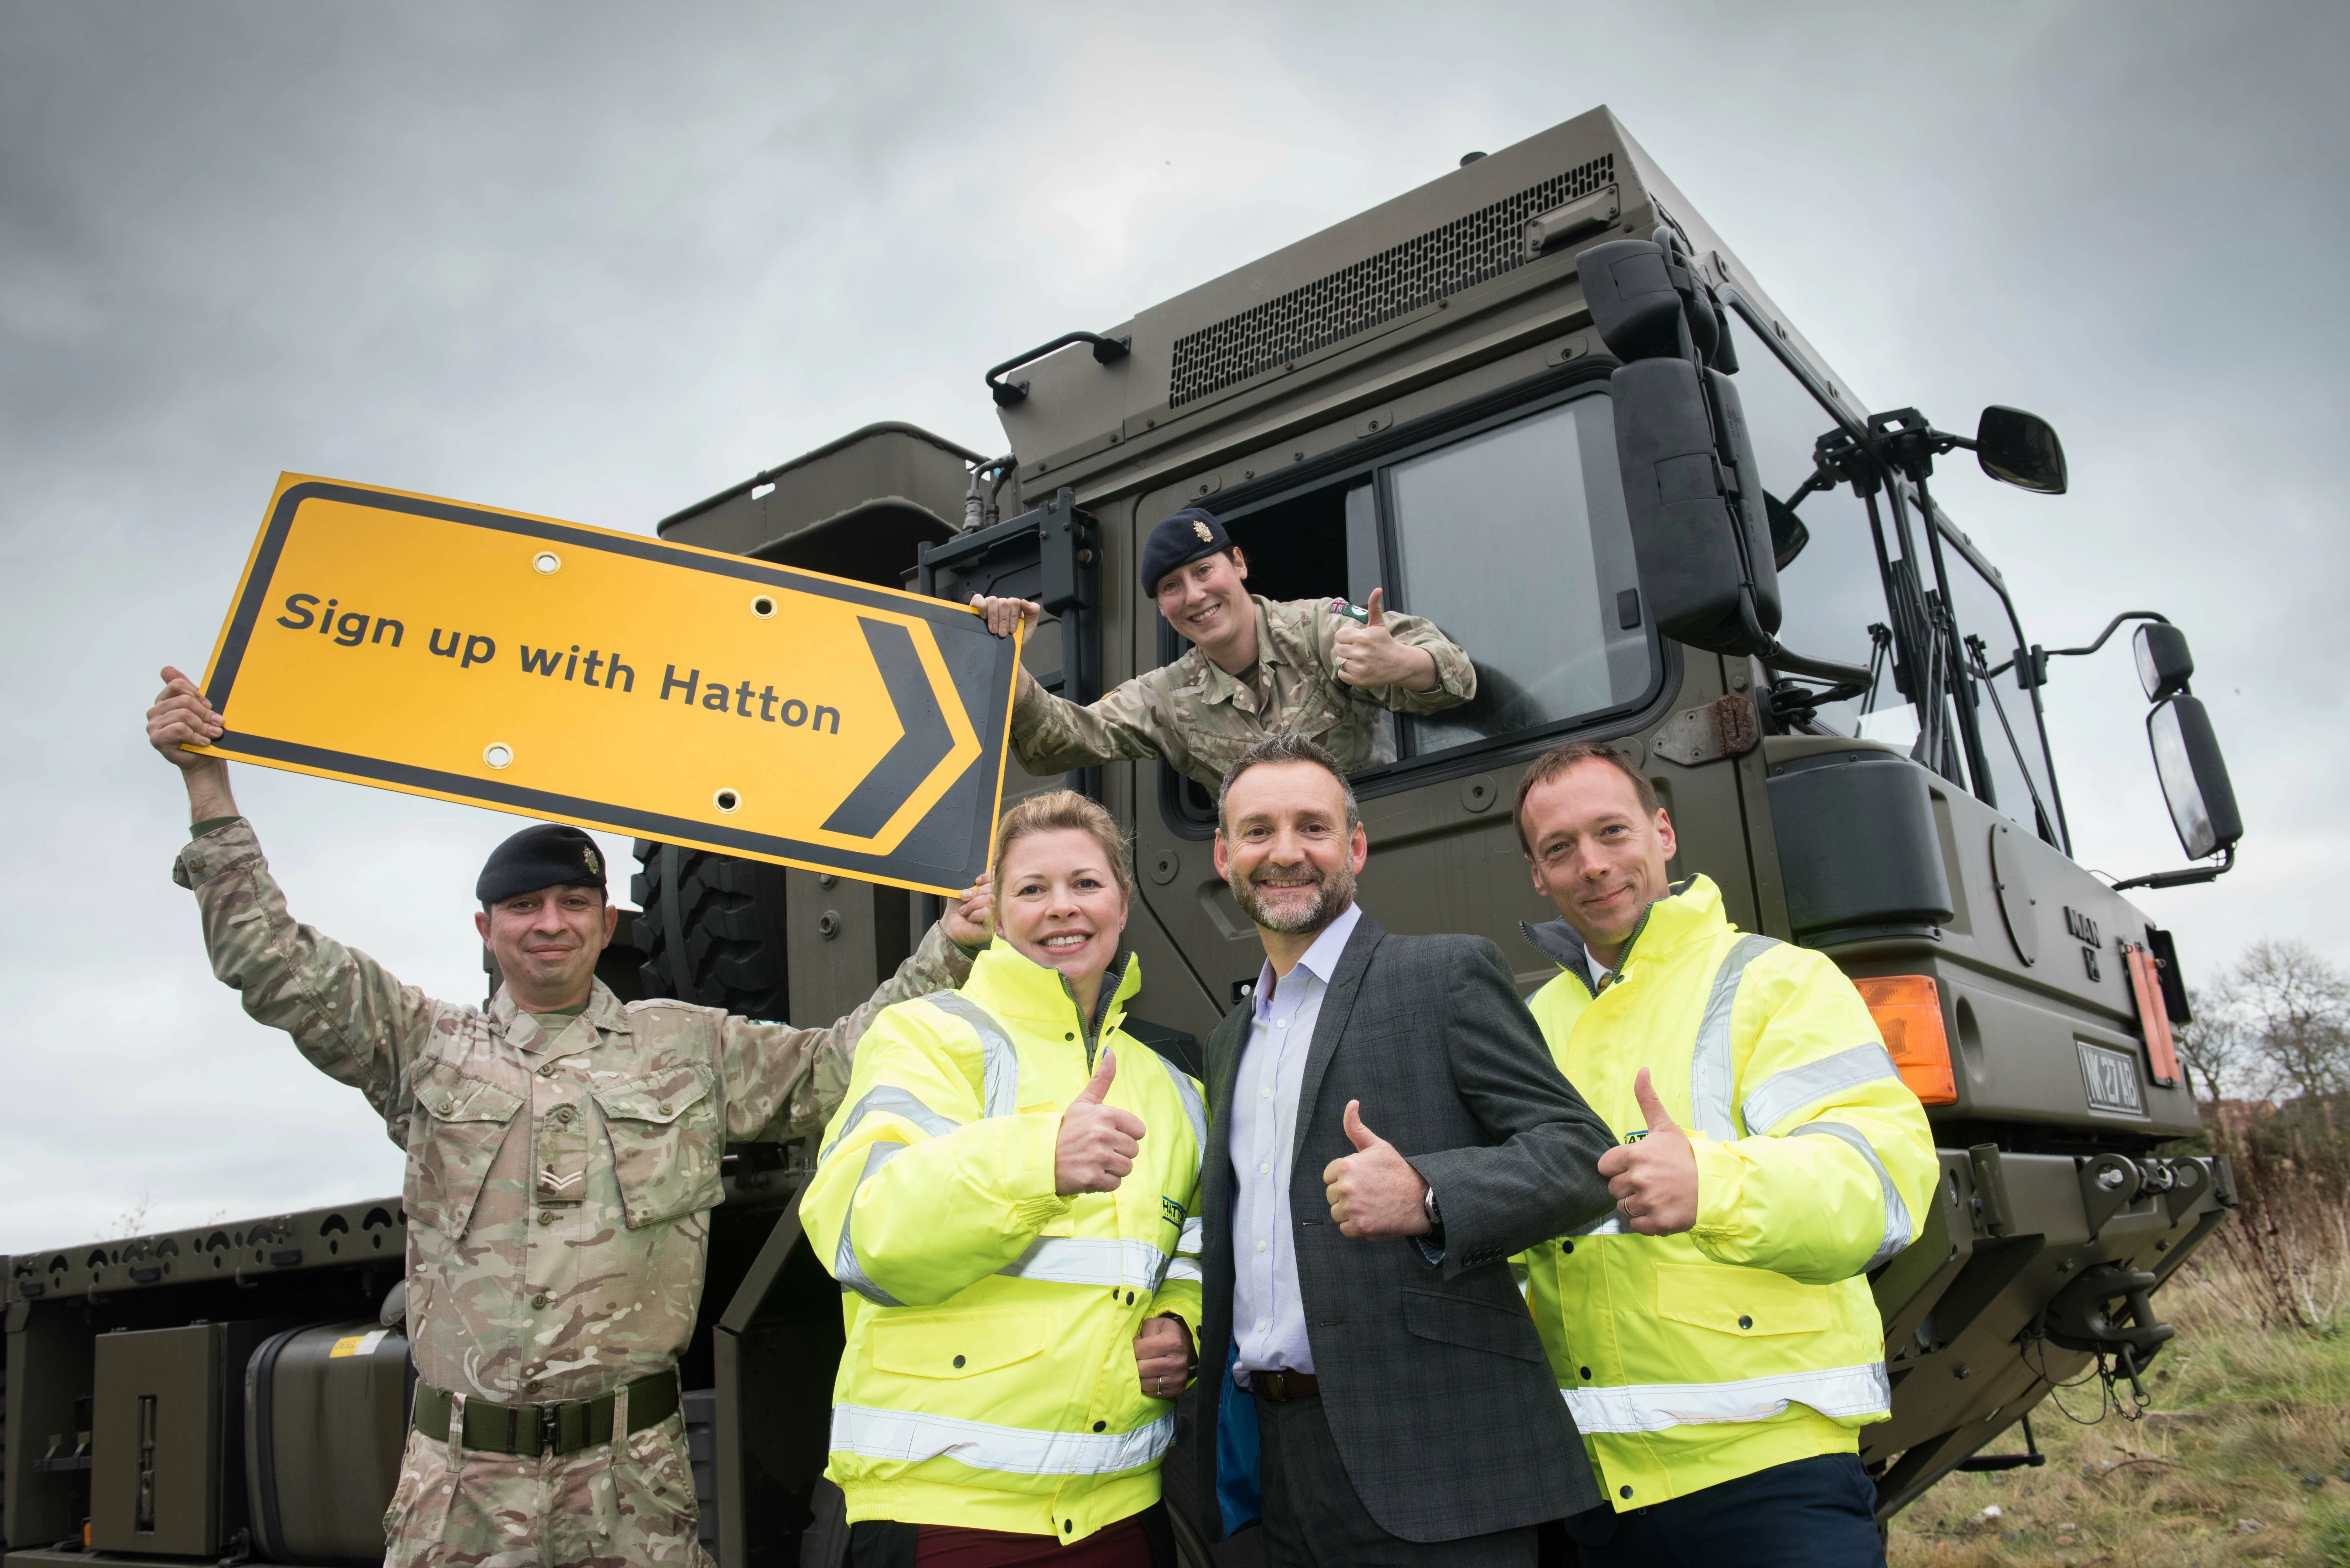 (L to R): Lance Corporal Richard Pill, Soldier, Lara Bailey, Commercial Manager of Hatton Traffic Management, Tom Bailey, Managing Director of Hatton Traffic Management, Private Julie Earnshaw, Soldier. 